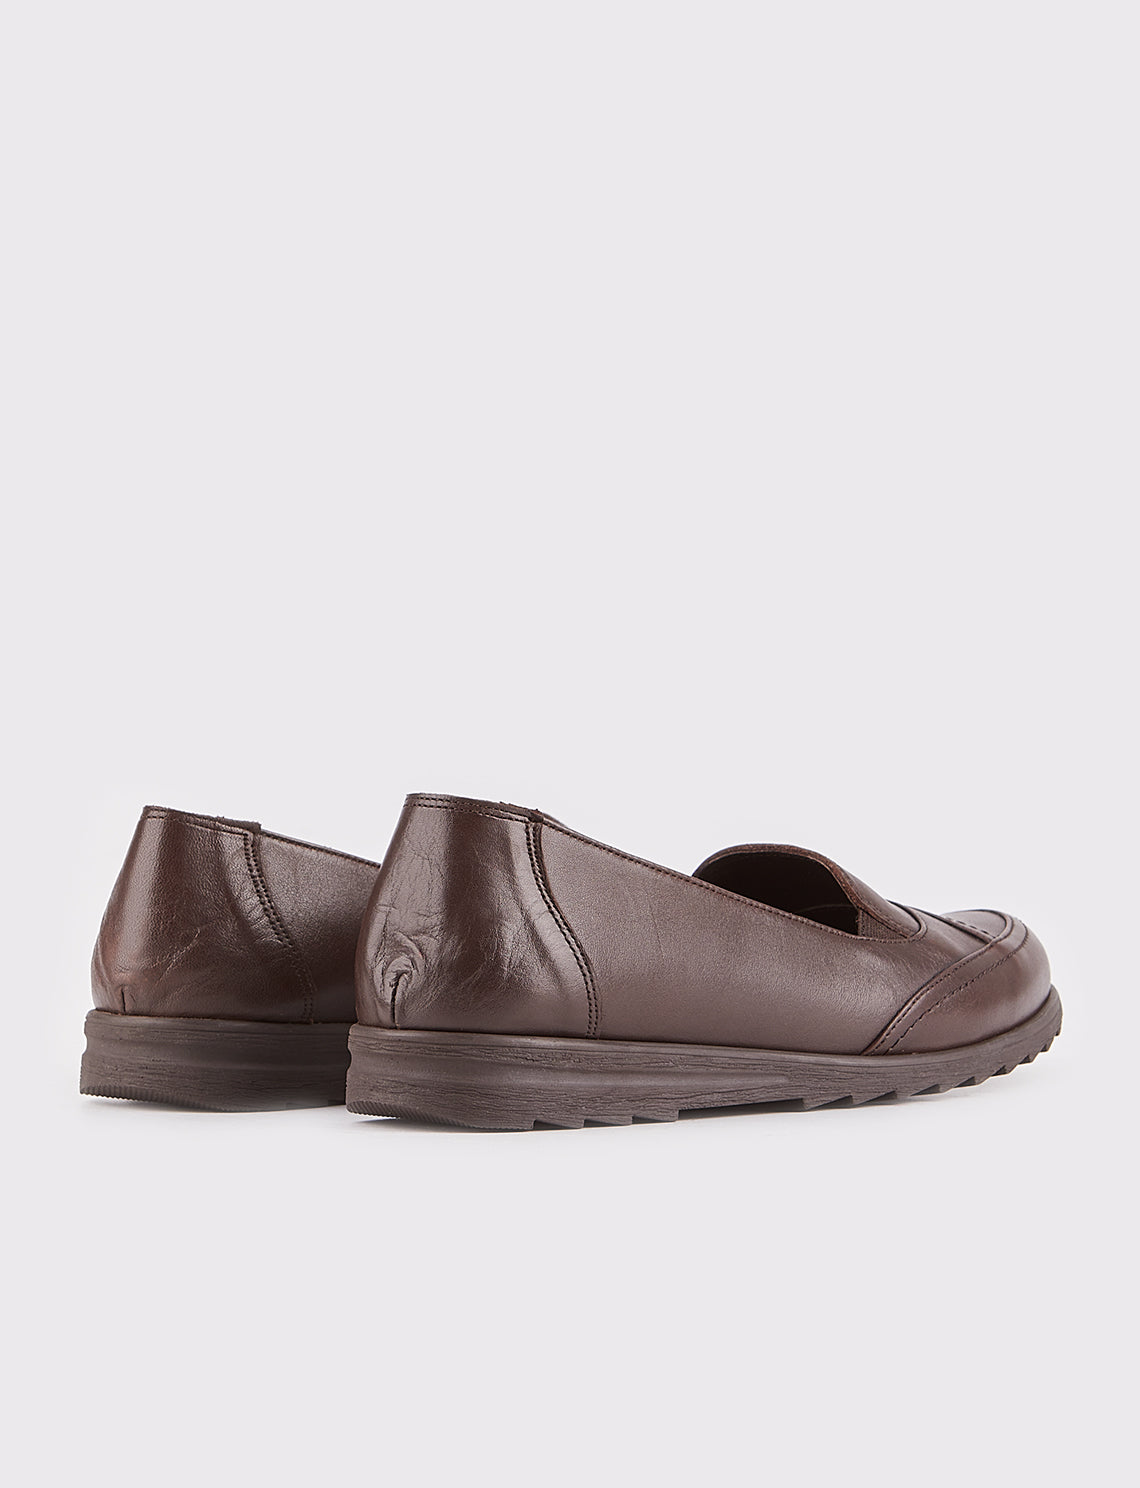 Women Brown Genuine Leather Casual Flat Shoes